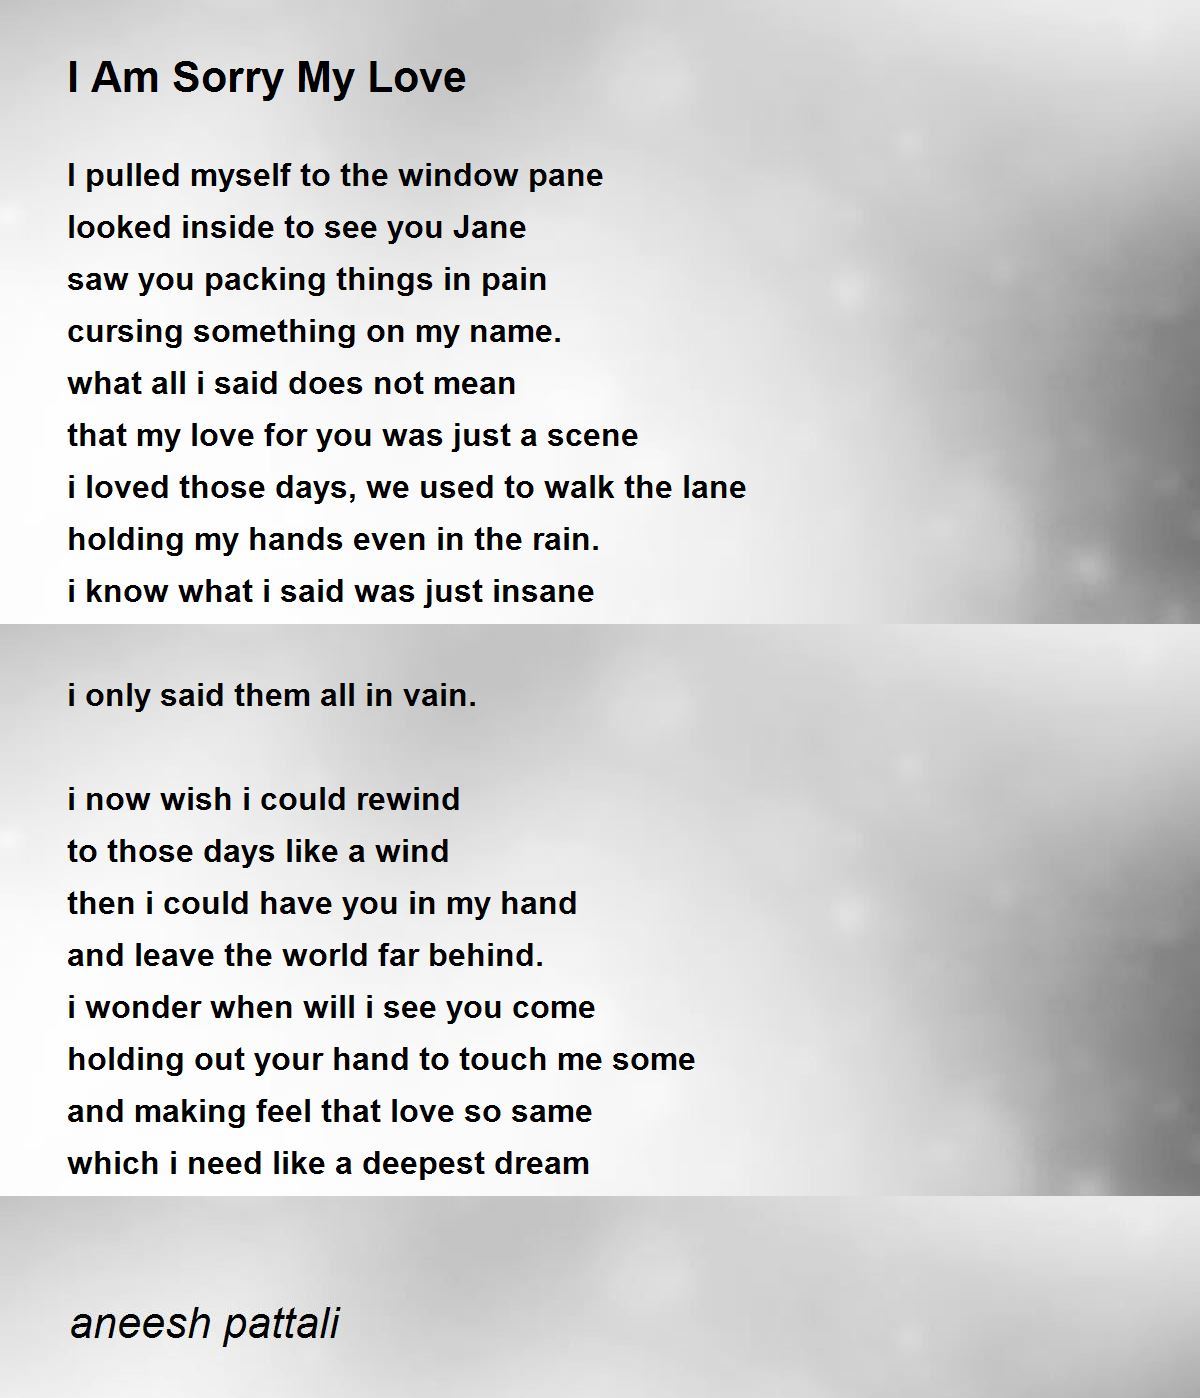 I Am Sorry My Love - I Am Sorry My Love Poem by aneesh pattali